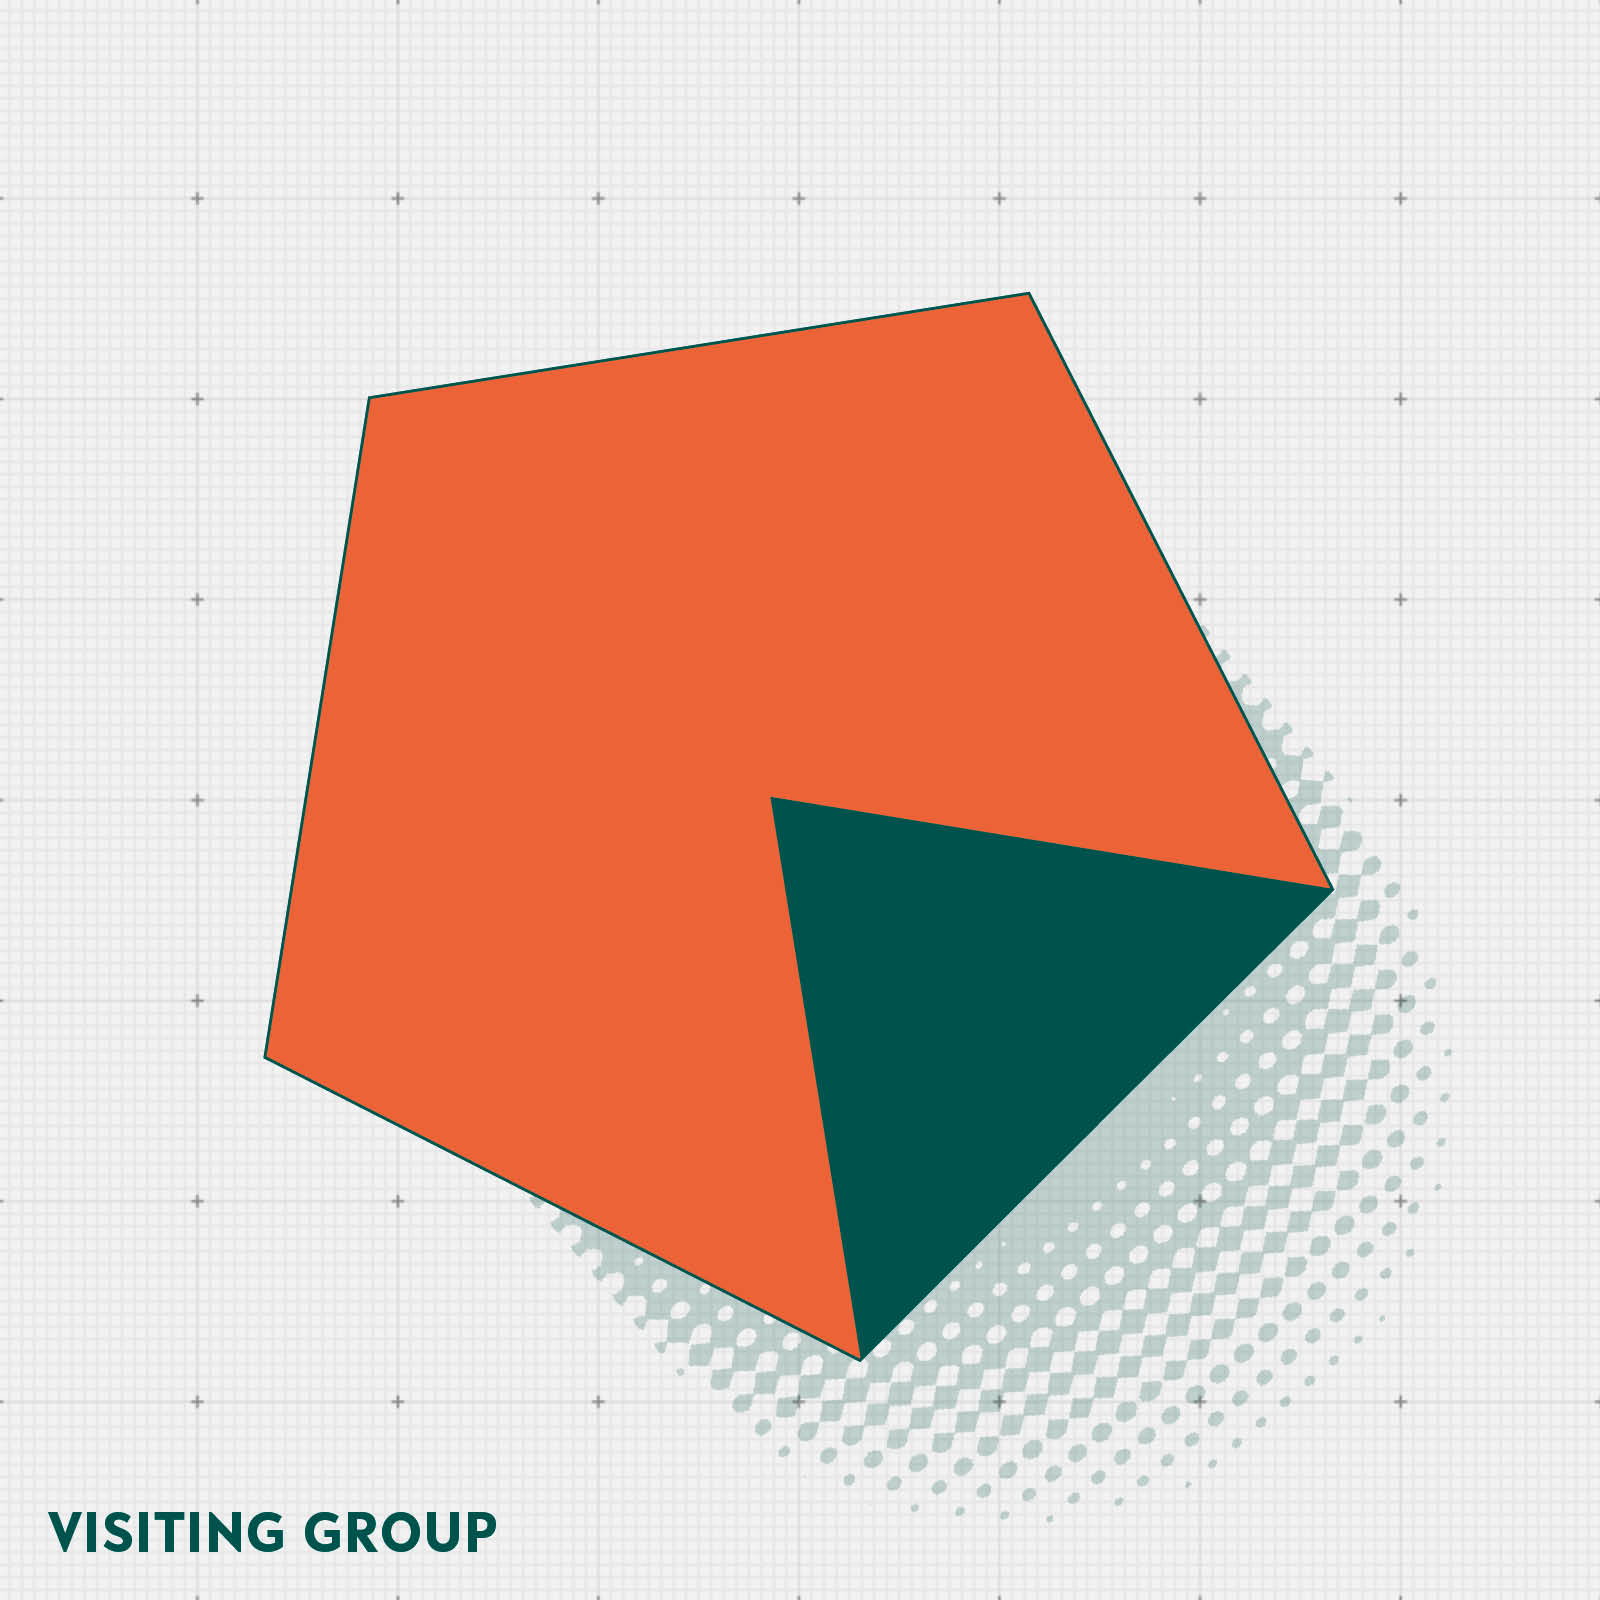 Graphic: an orange pentagon with a green triangle on it, representing the length of a Visiting Group